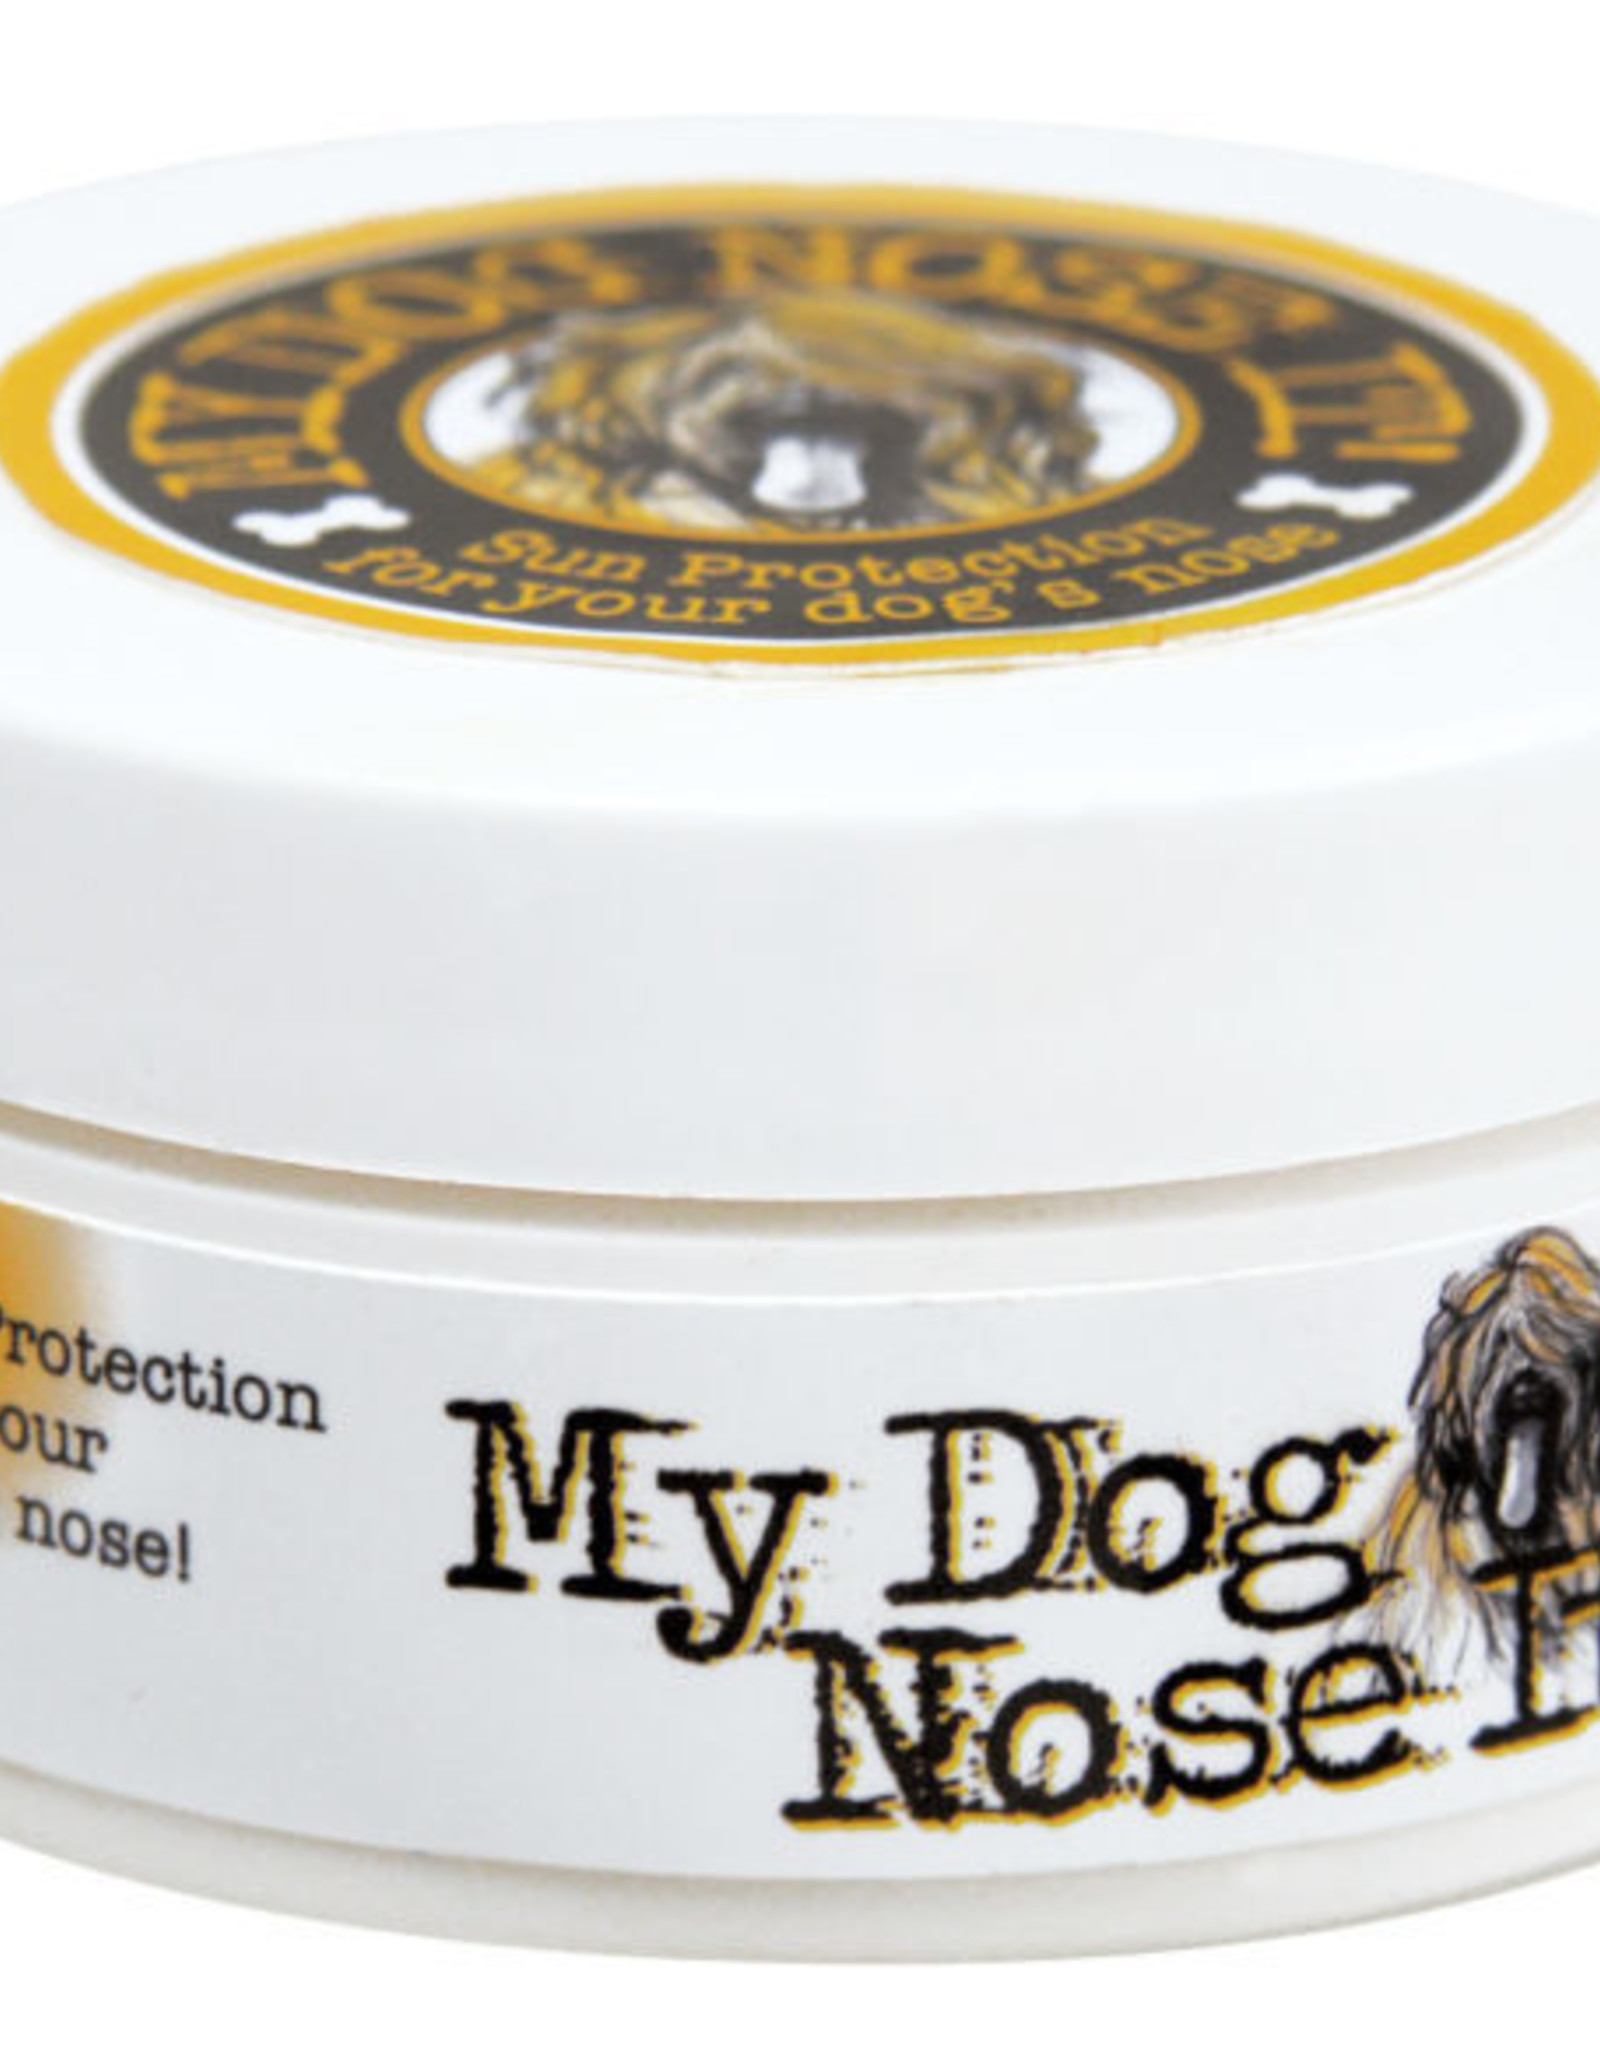 My Dog Nose It My Dog Nose It! Sun Protection